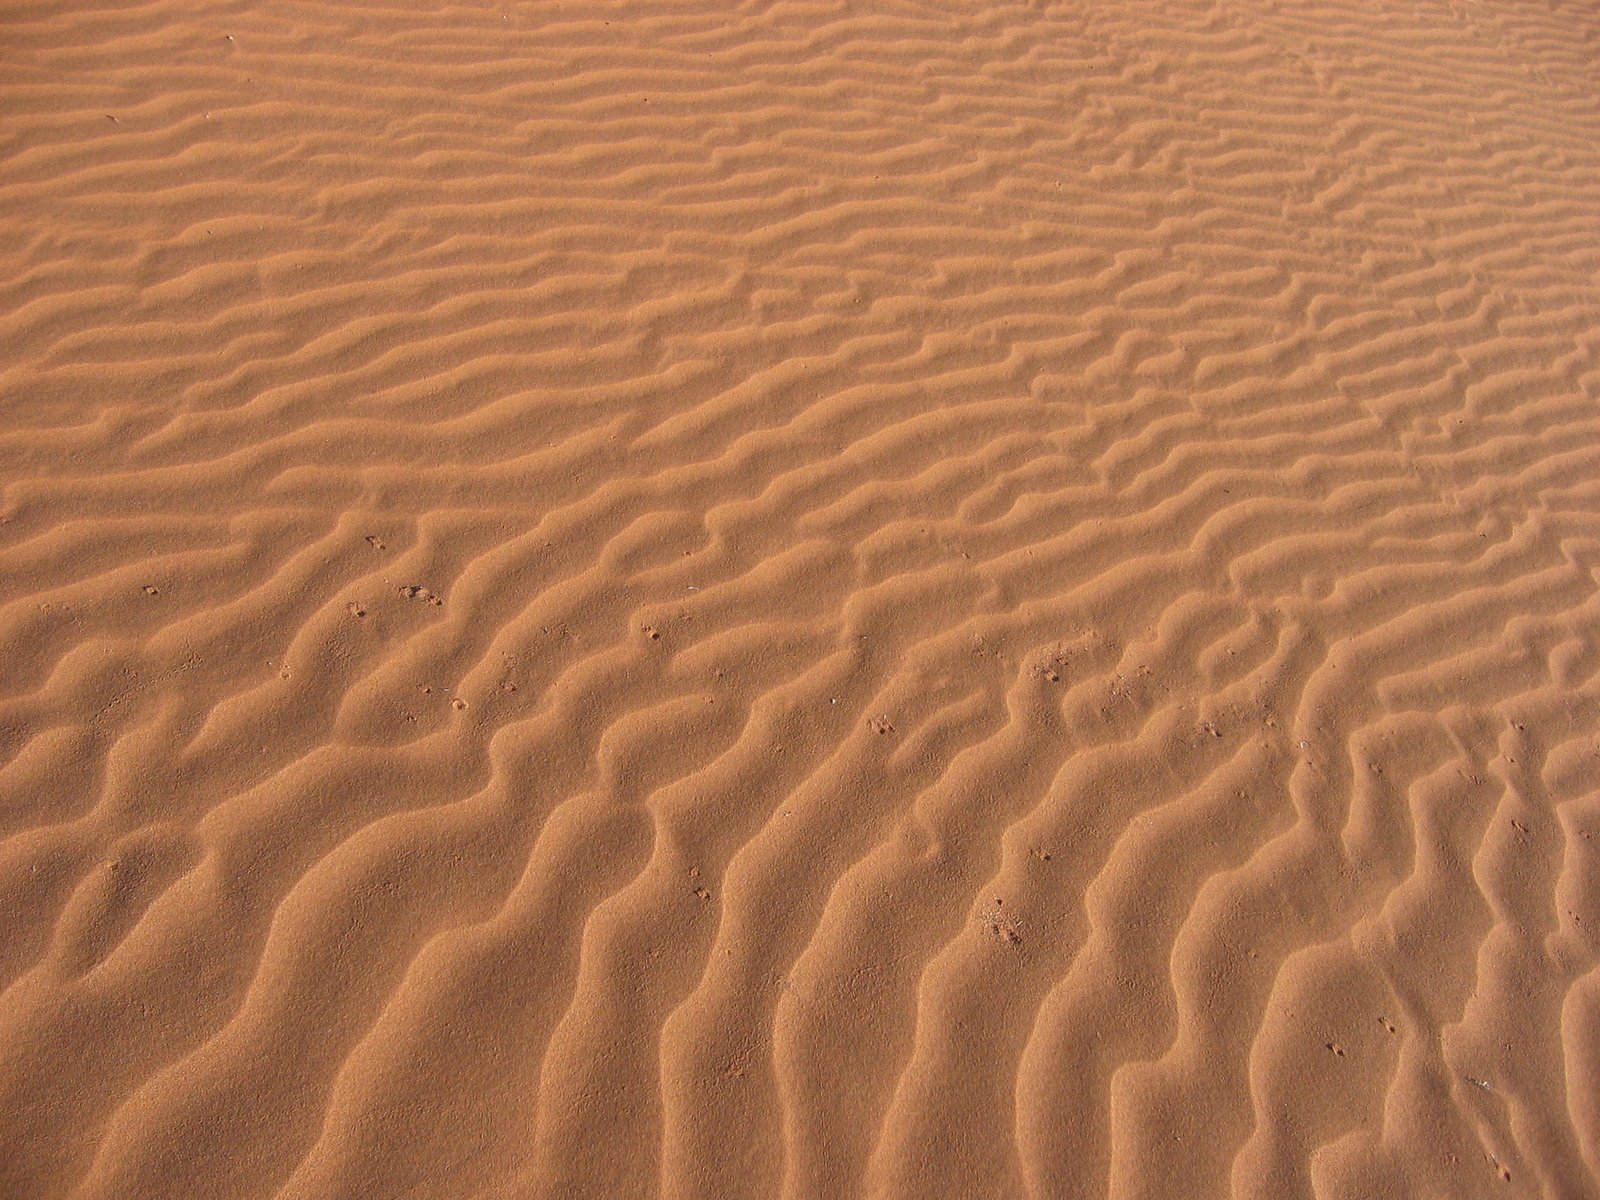 an image of a sandy surface with small waves